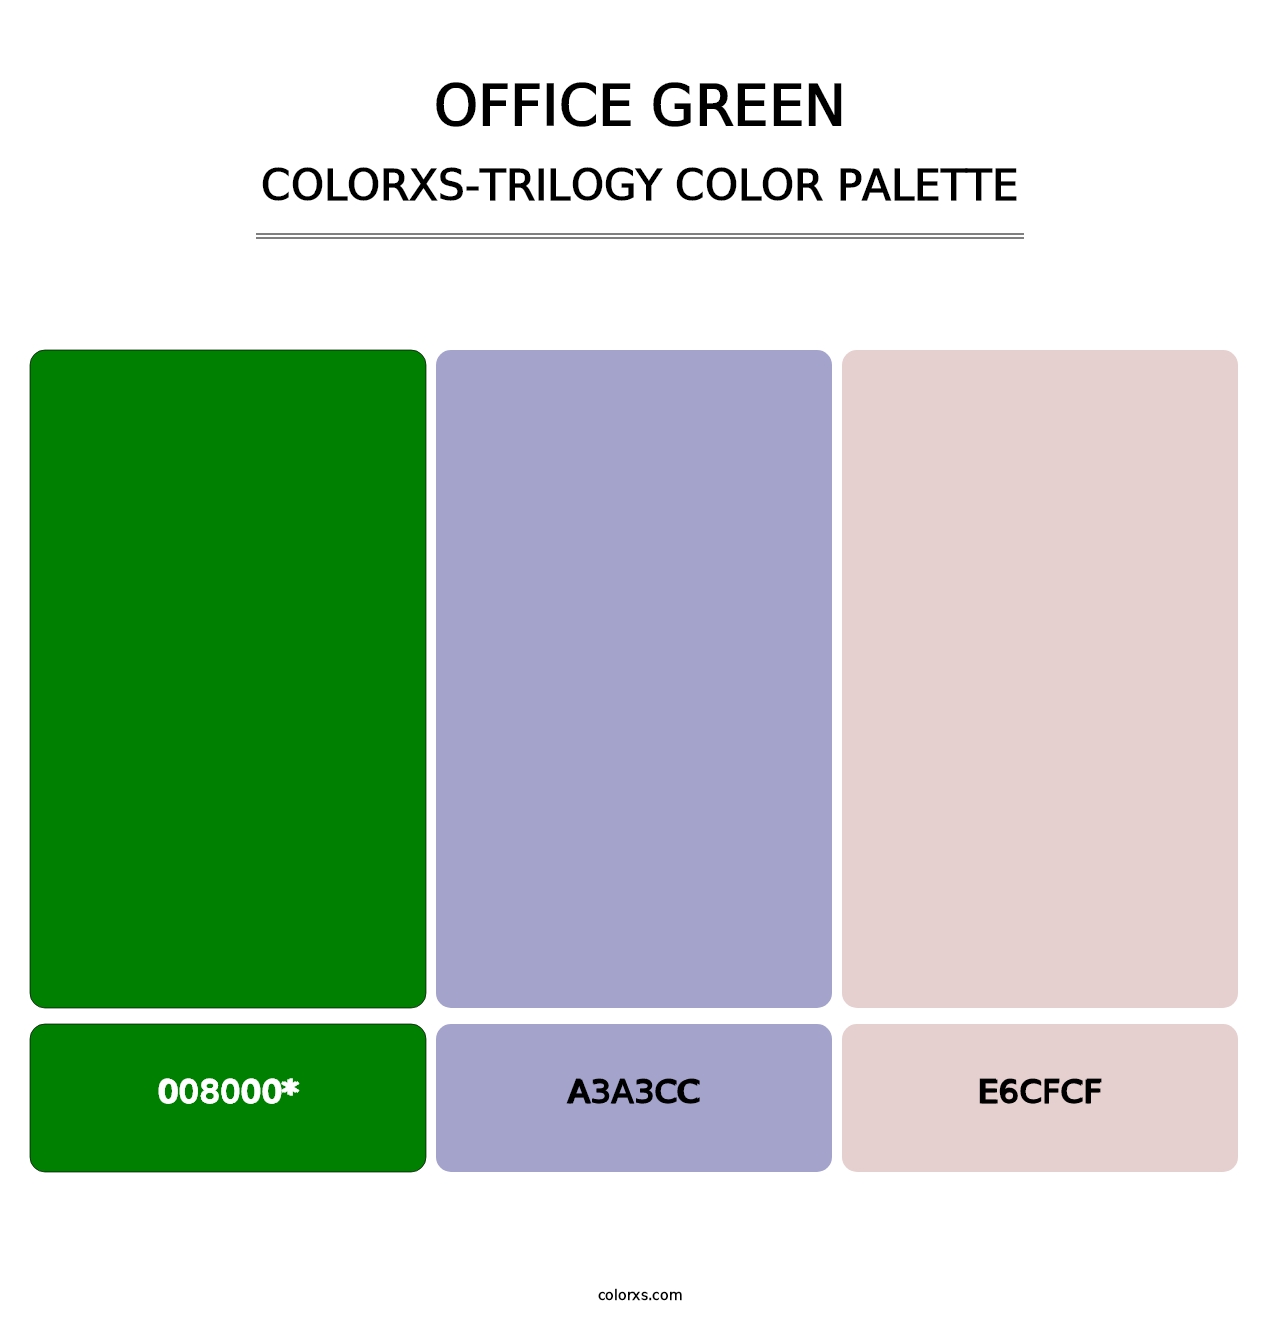 Office Green - Colorxs Trilogy Palette